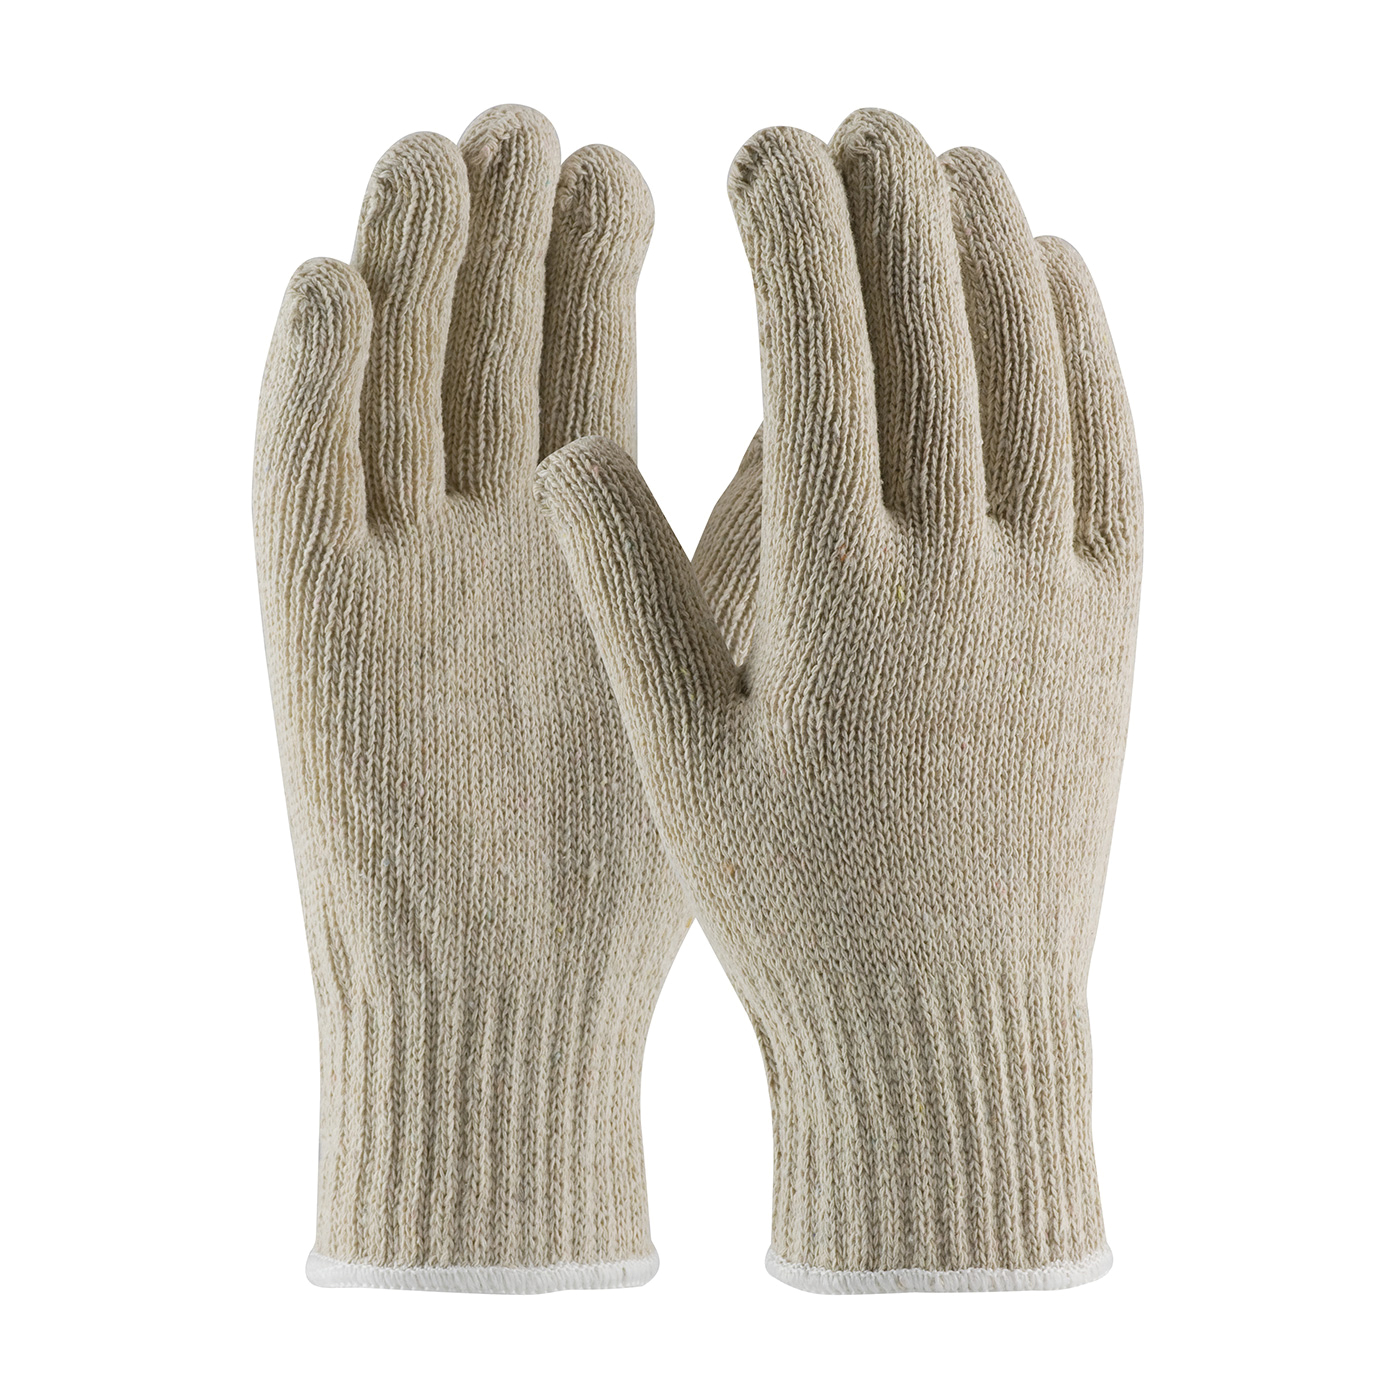 PIP® 35-C410/L 35-C410 Heavyweight General Purpose Gloves, Seamless Style, L, Cotton/Polyester Palm, 7 ga 65% Cotton/35% Polyester, Natural, Continuous Knit Wrist Cuff, Uncoated Coating, Cotton/Polyester Lining